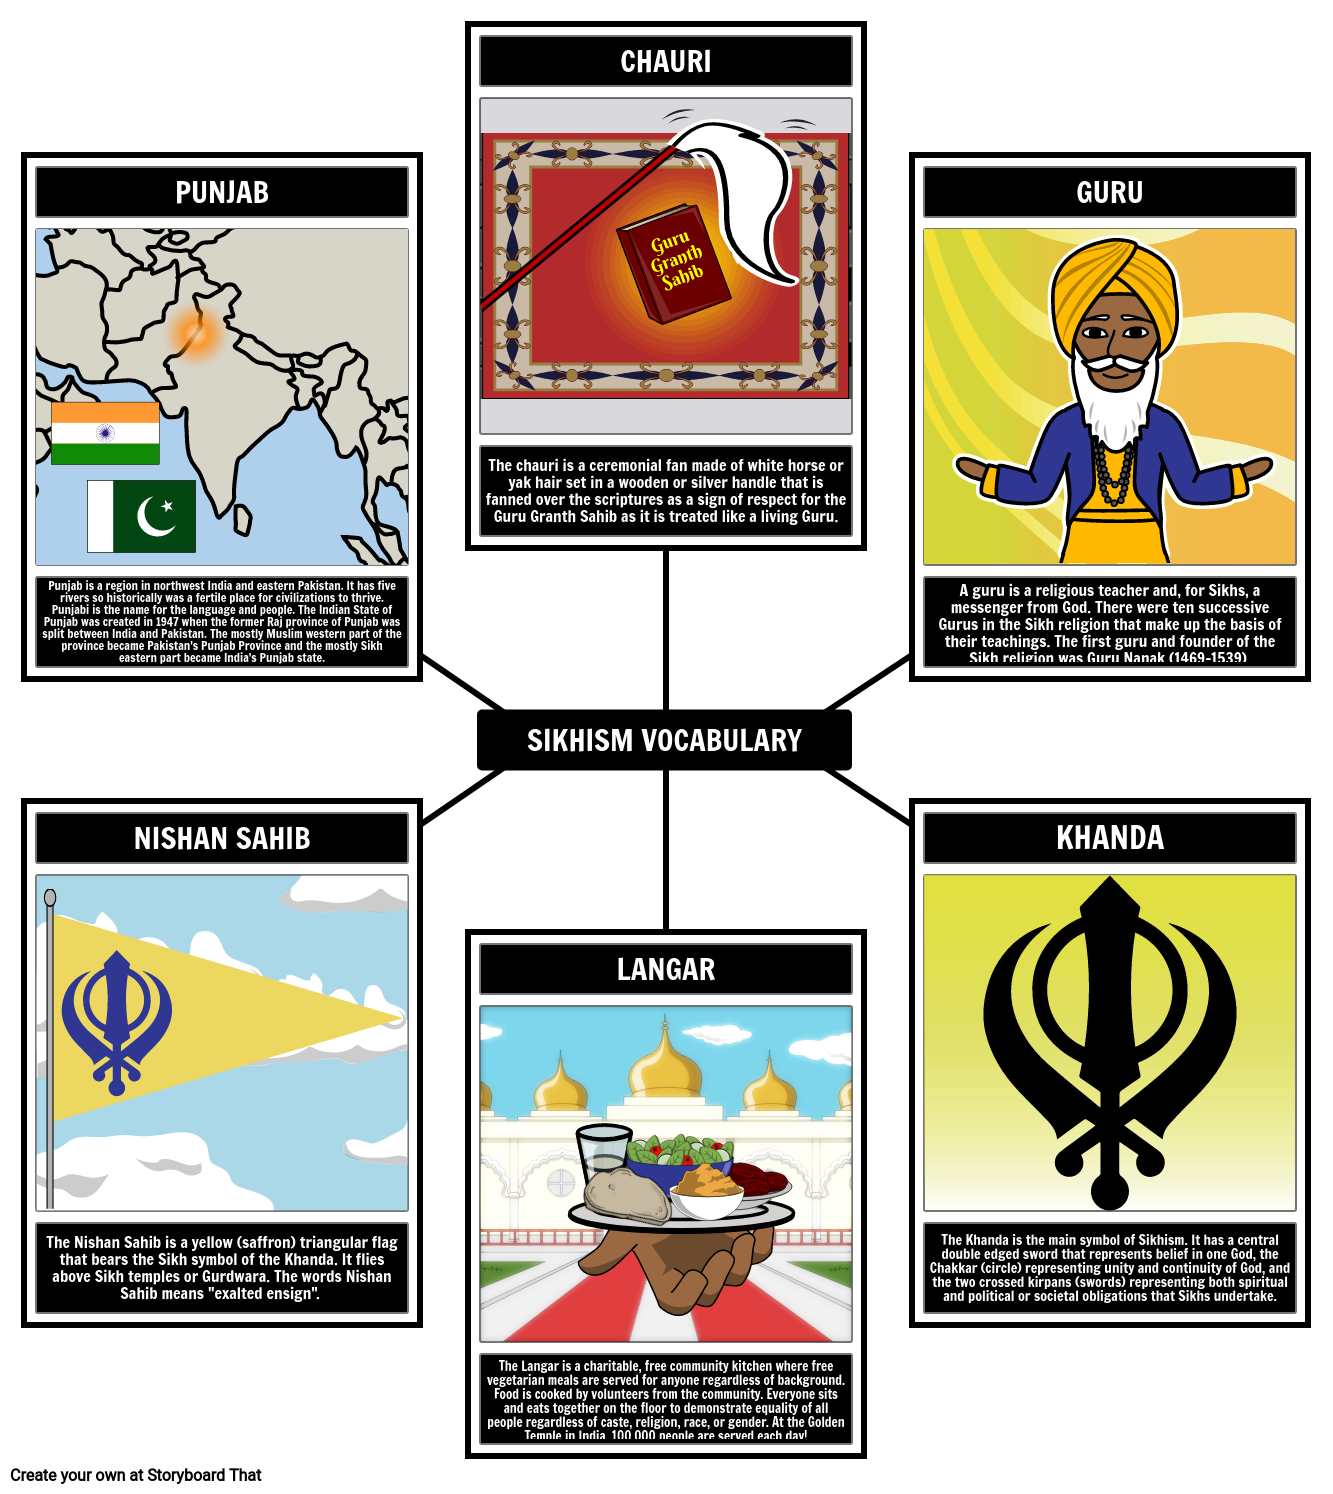 Sikhism Vocabulary and Definitions Spider Map